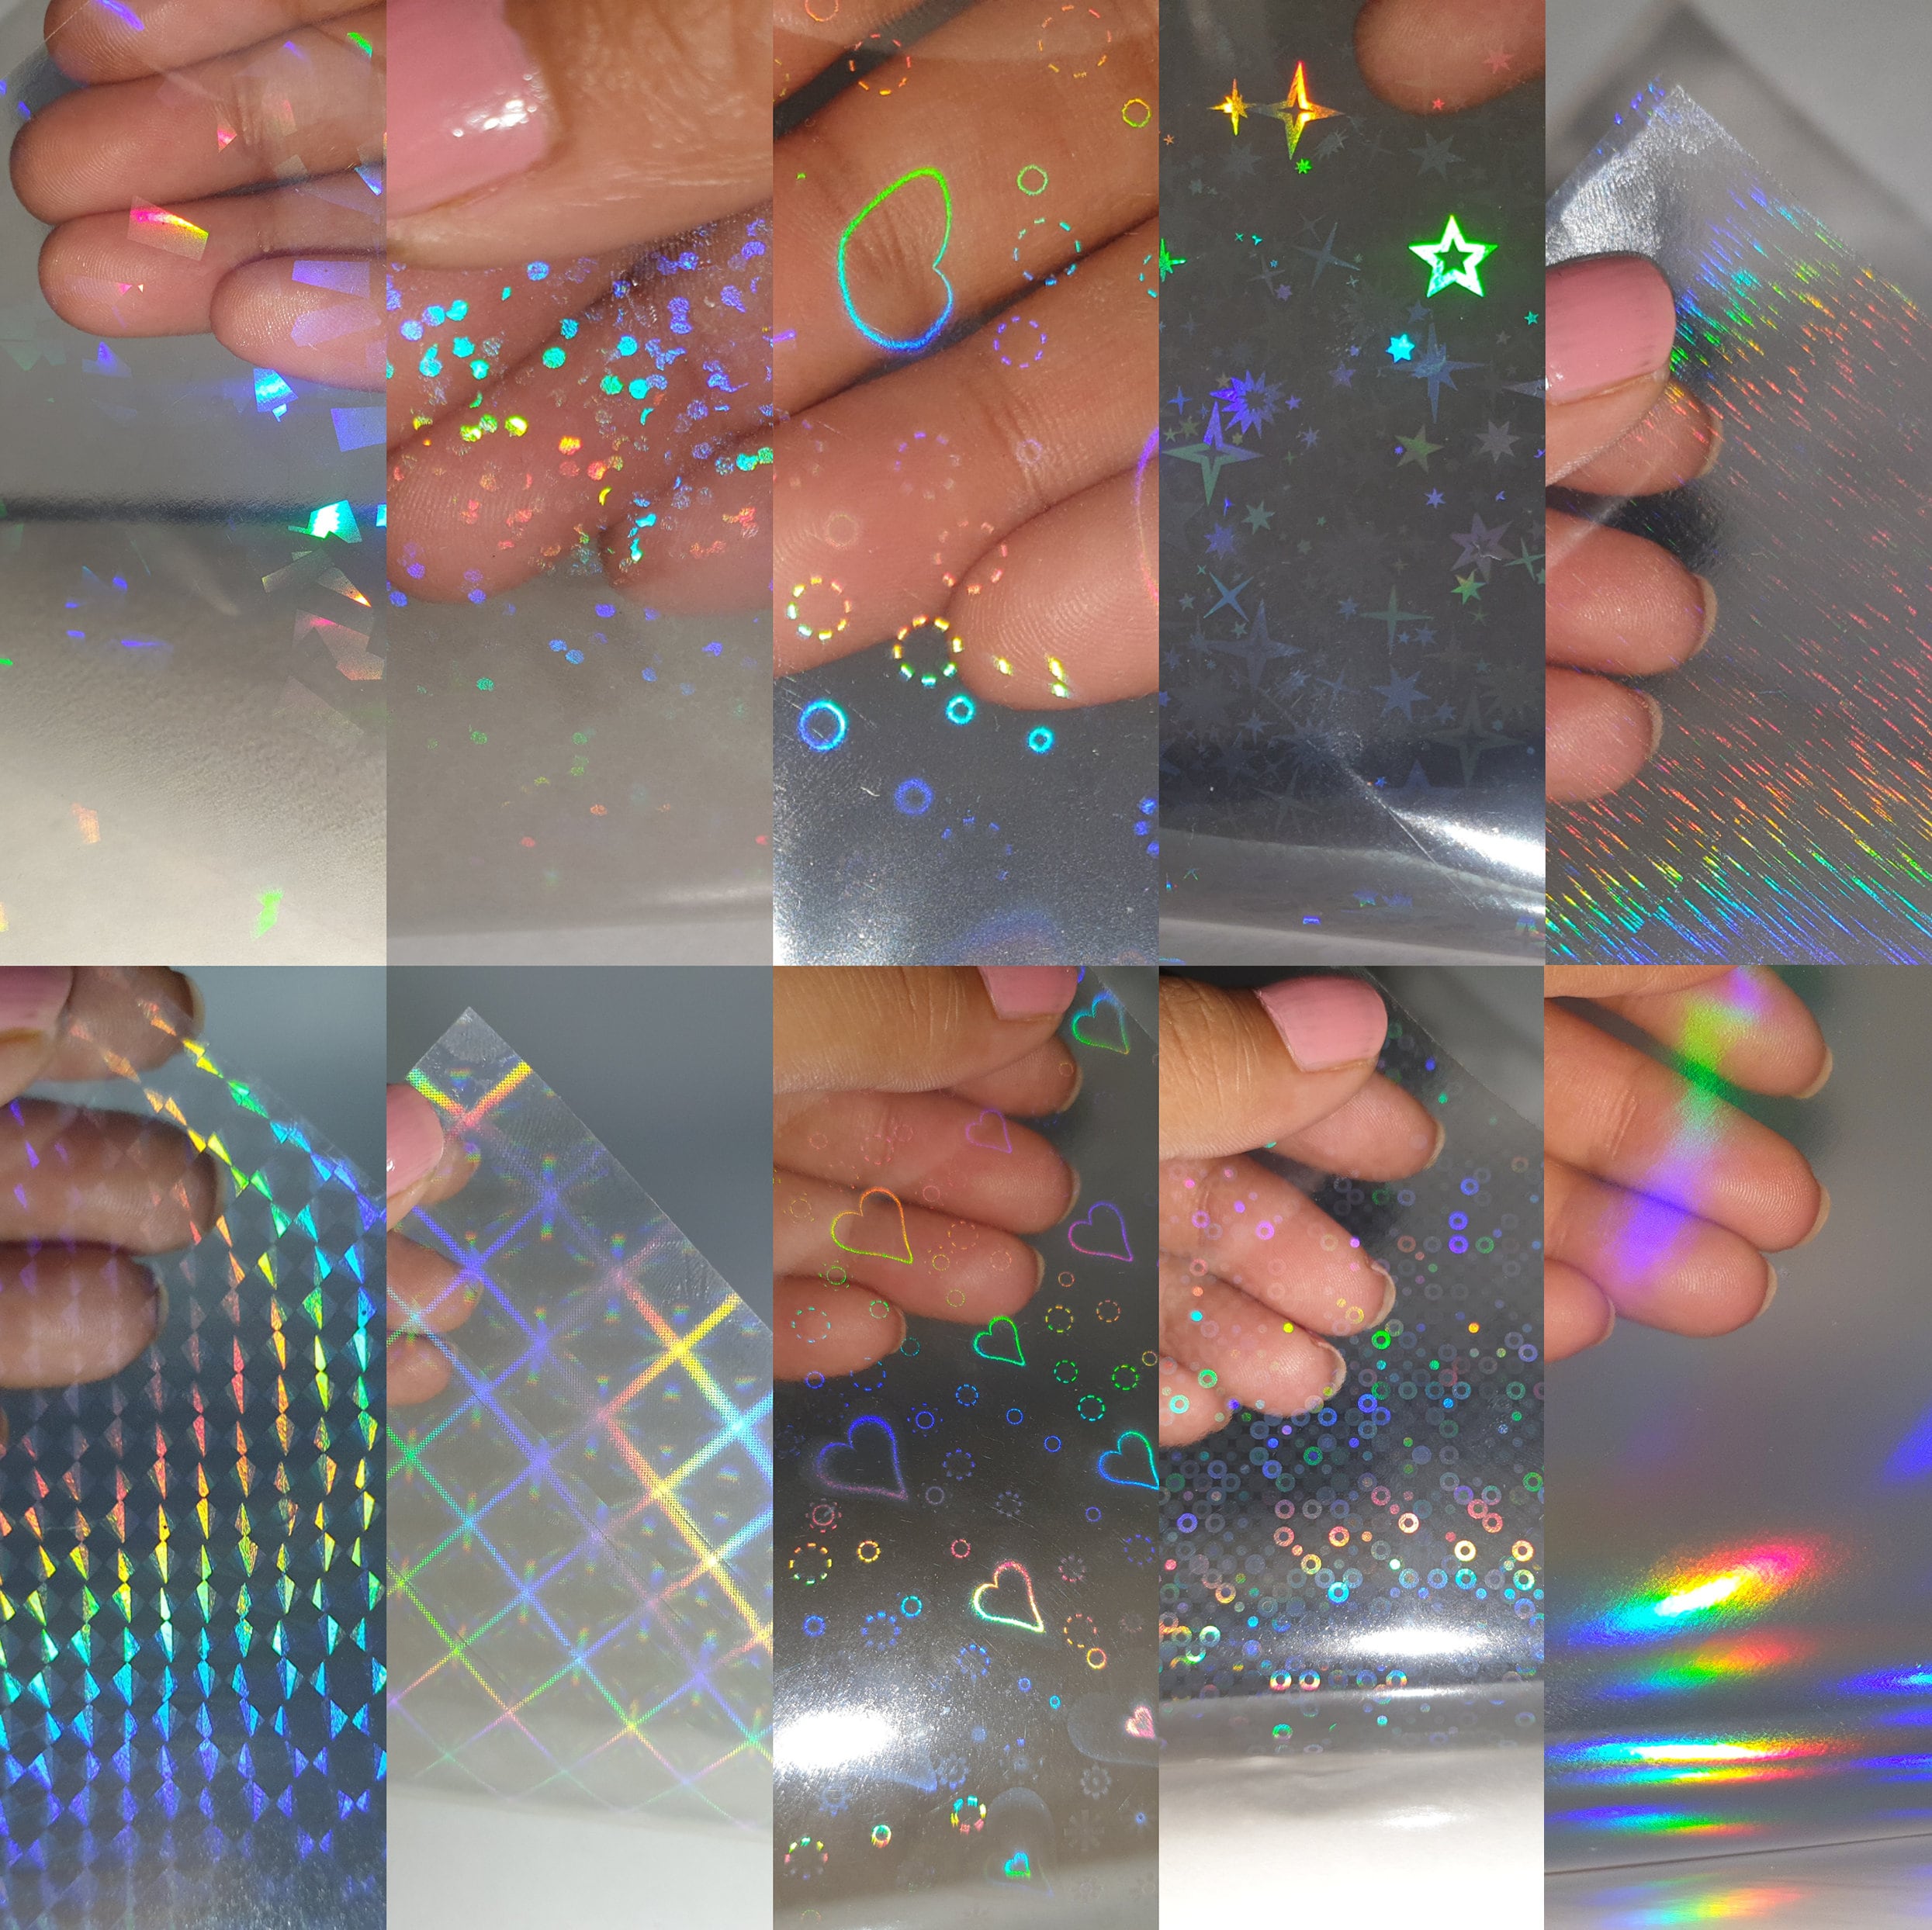 Cracked Glass Holographic Vinyl Sticker Laminate Self Adhesive Overlay  Resin Transparency Holographic Sticker Paper, Sticker Overlay 